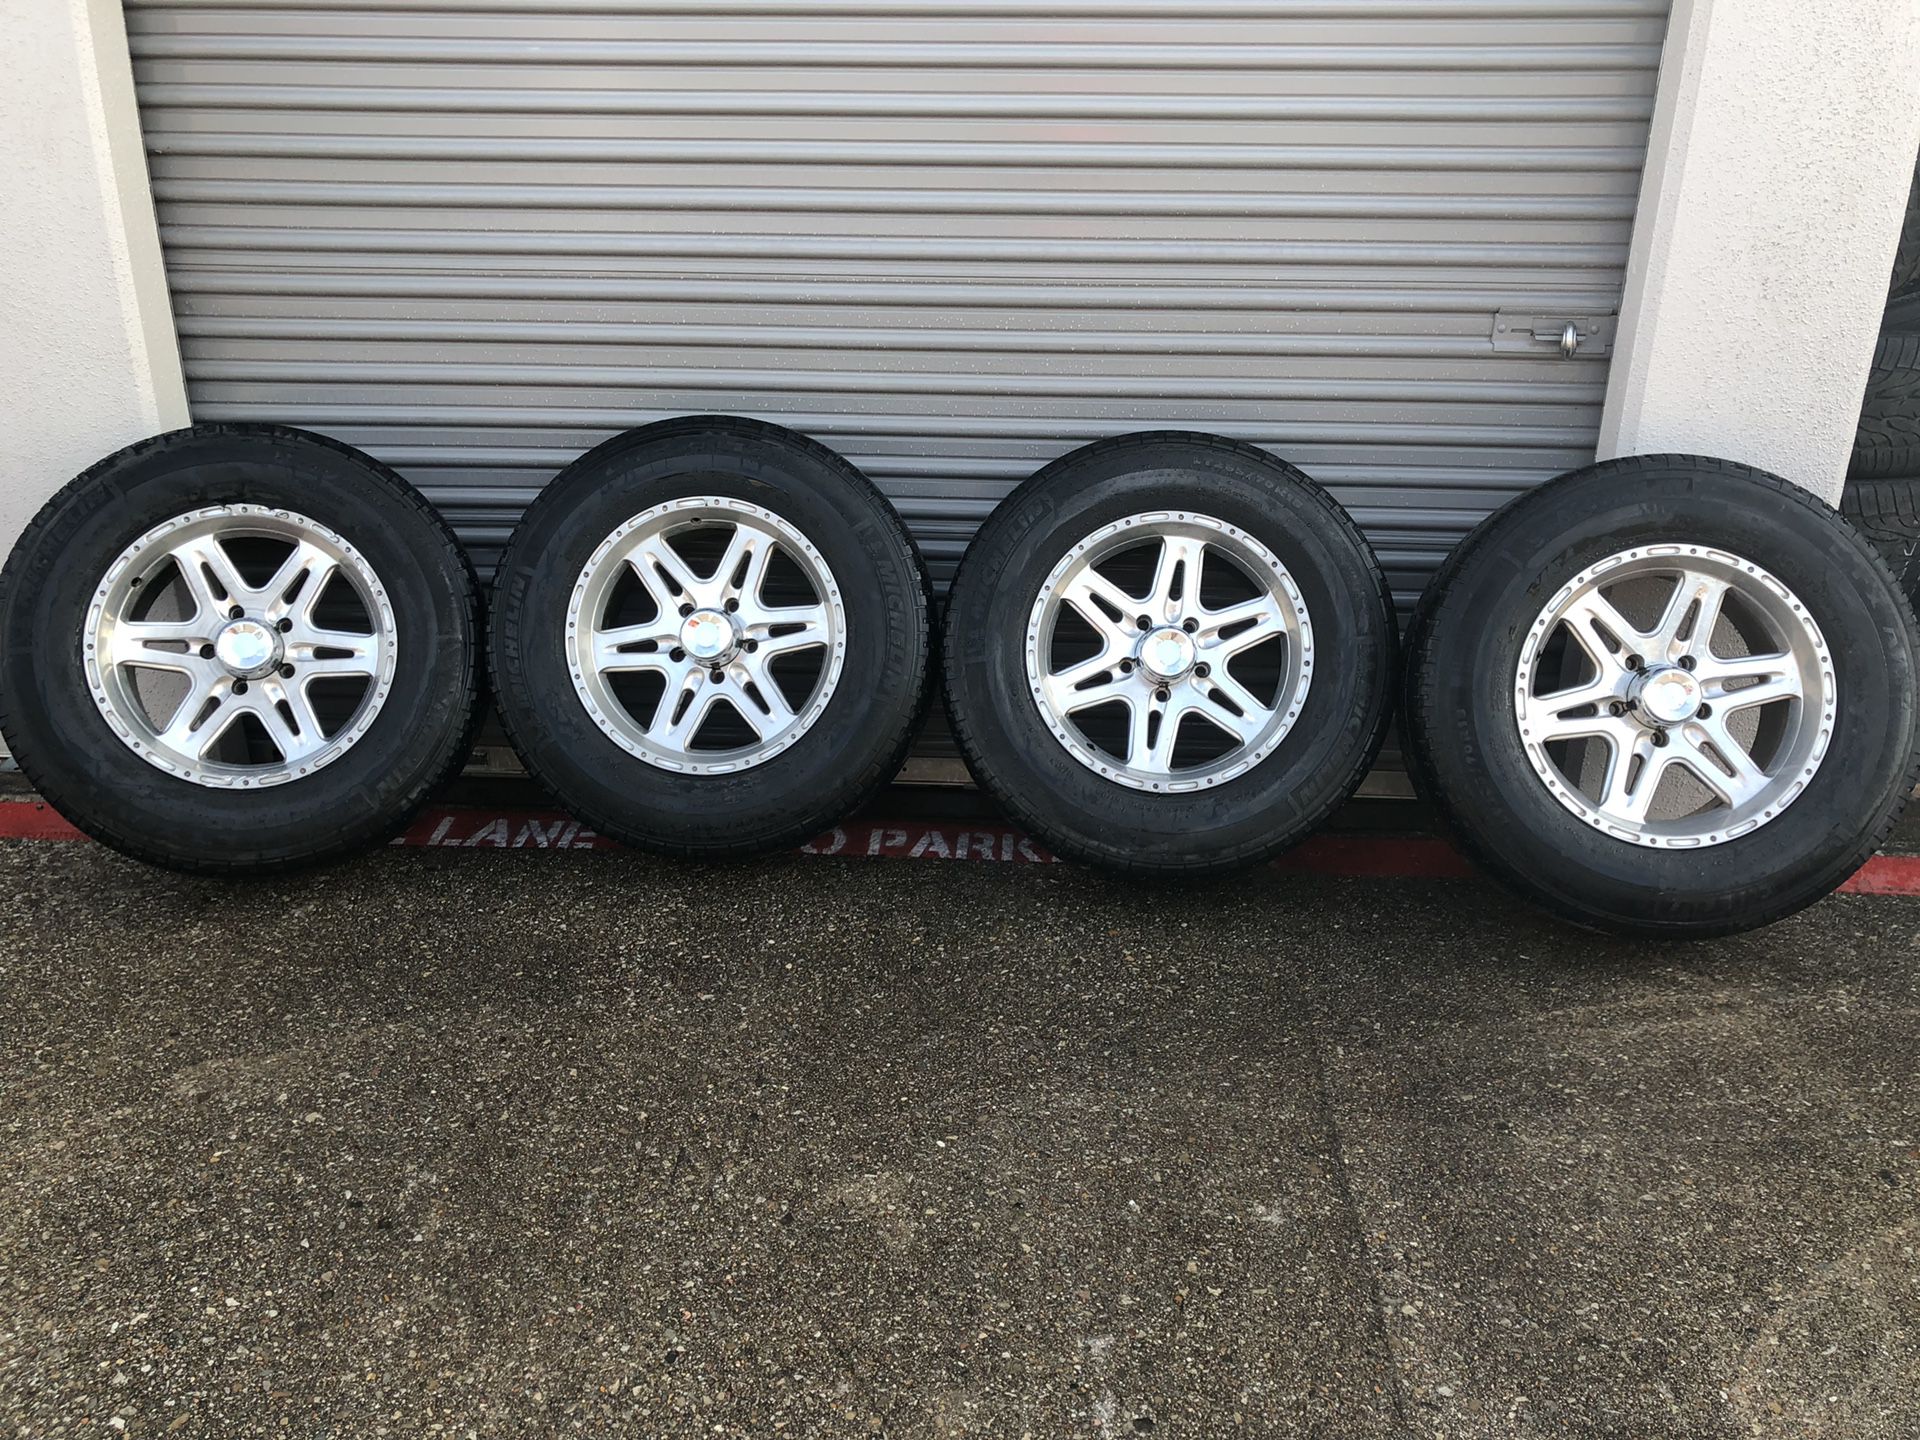 18” alloy rims with tires